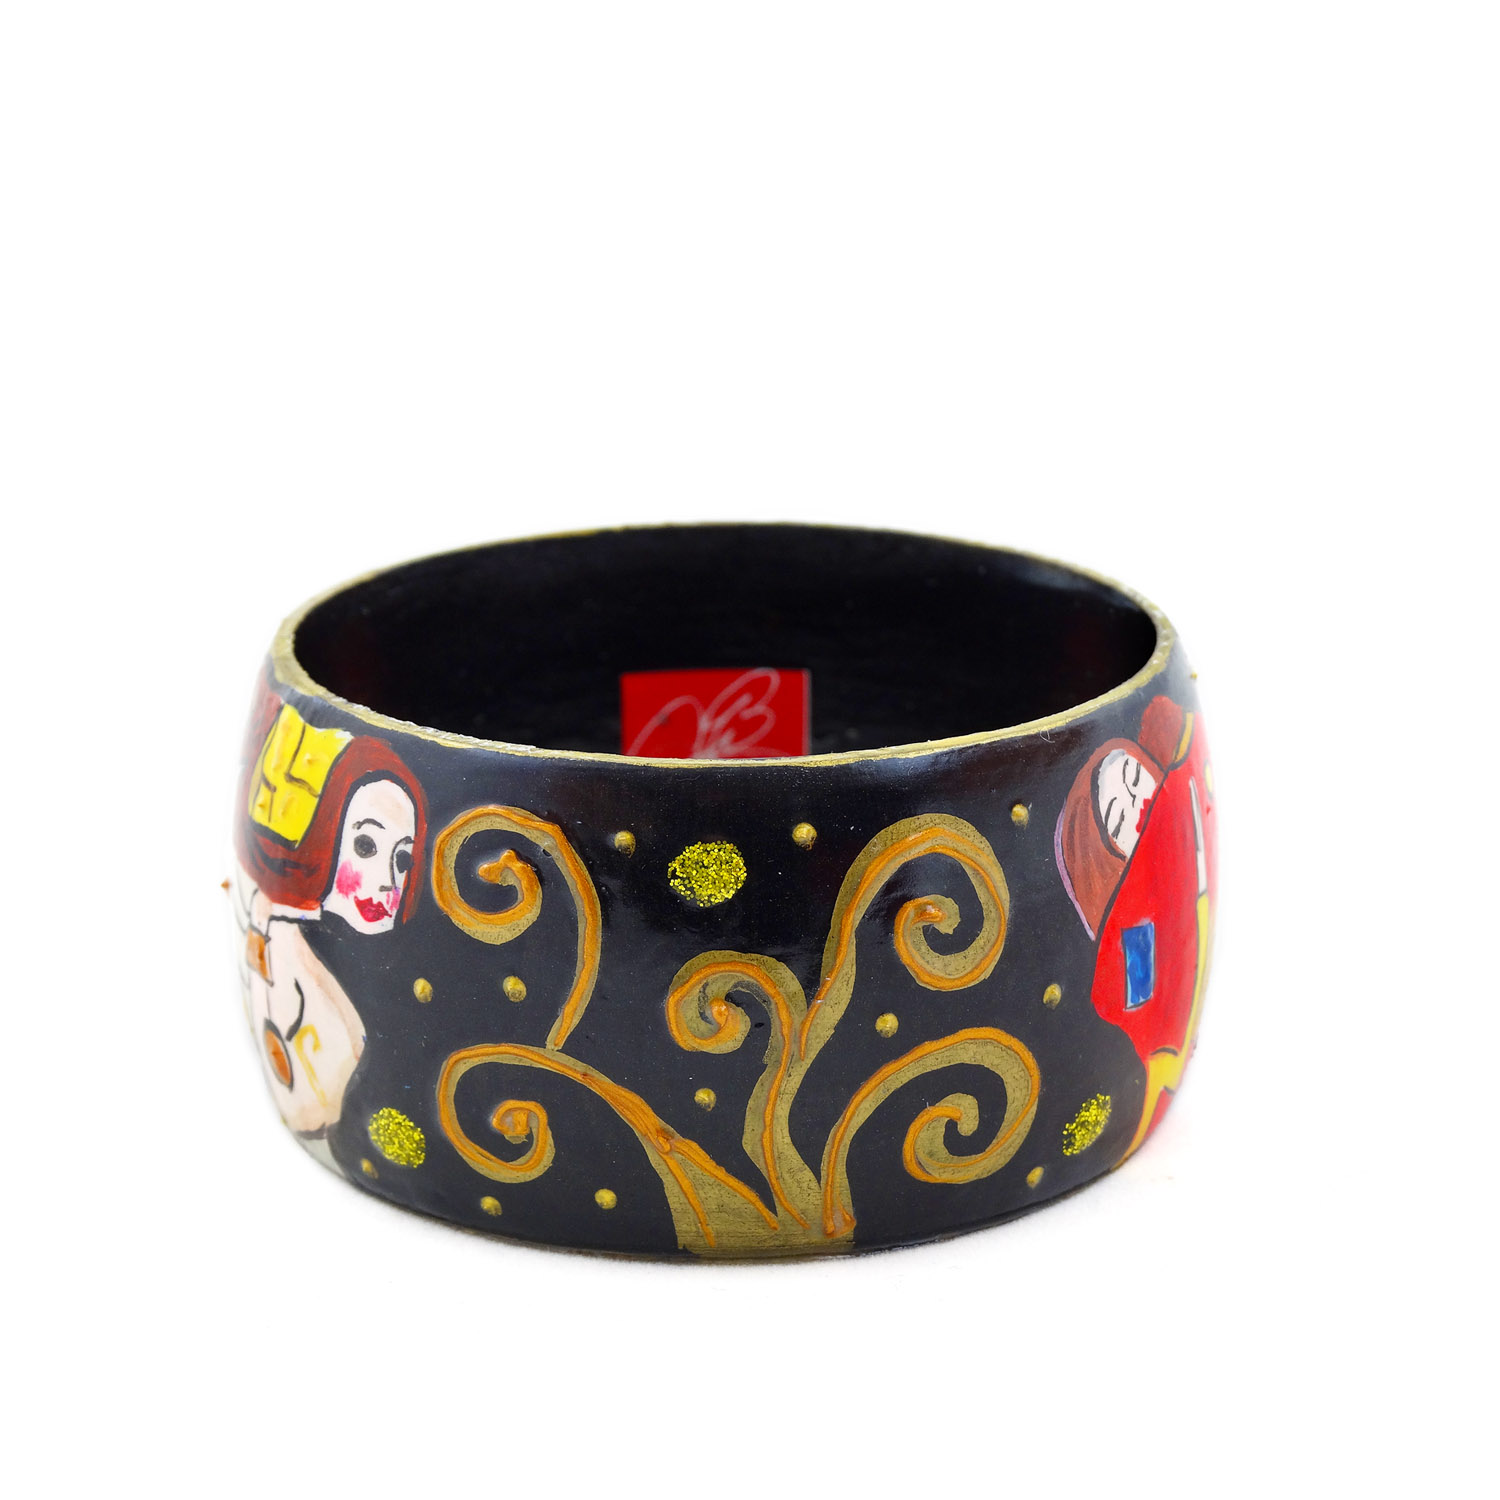 Hand-painted bangle - The Tree of Life by Klimt